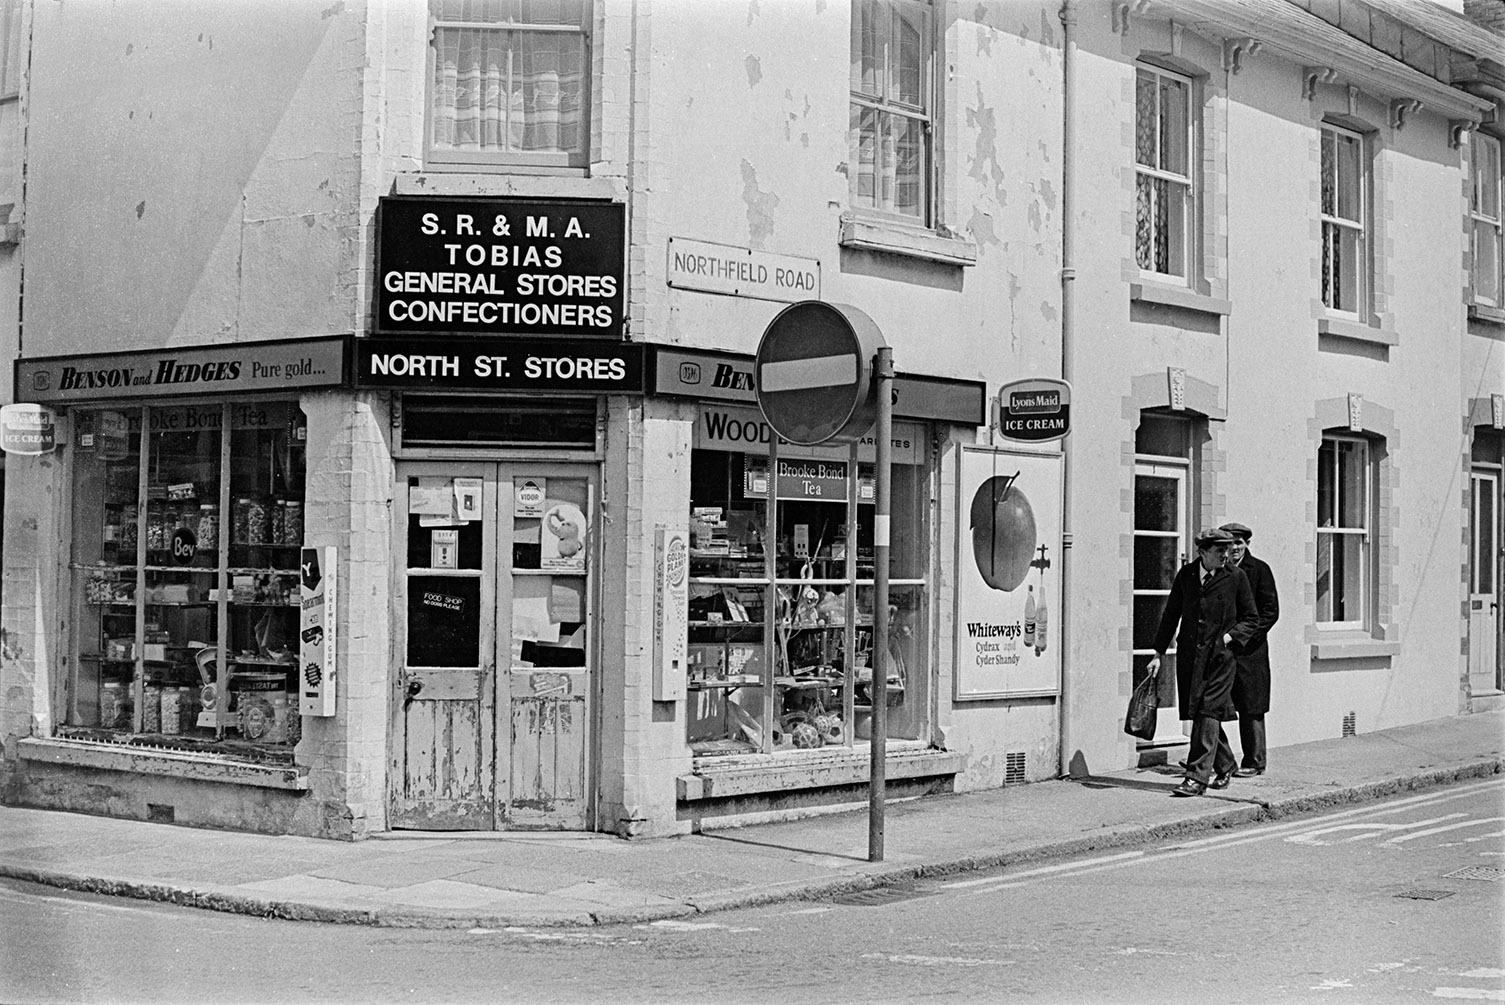 Two men walking towards North Street Stores on the corner shop of Northfield Road in Okehampton. The name above the shop is 'S R & M A Tobias'. Goods, including jars of sweets, are displayed in the shop front window.